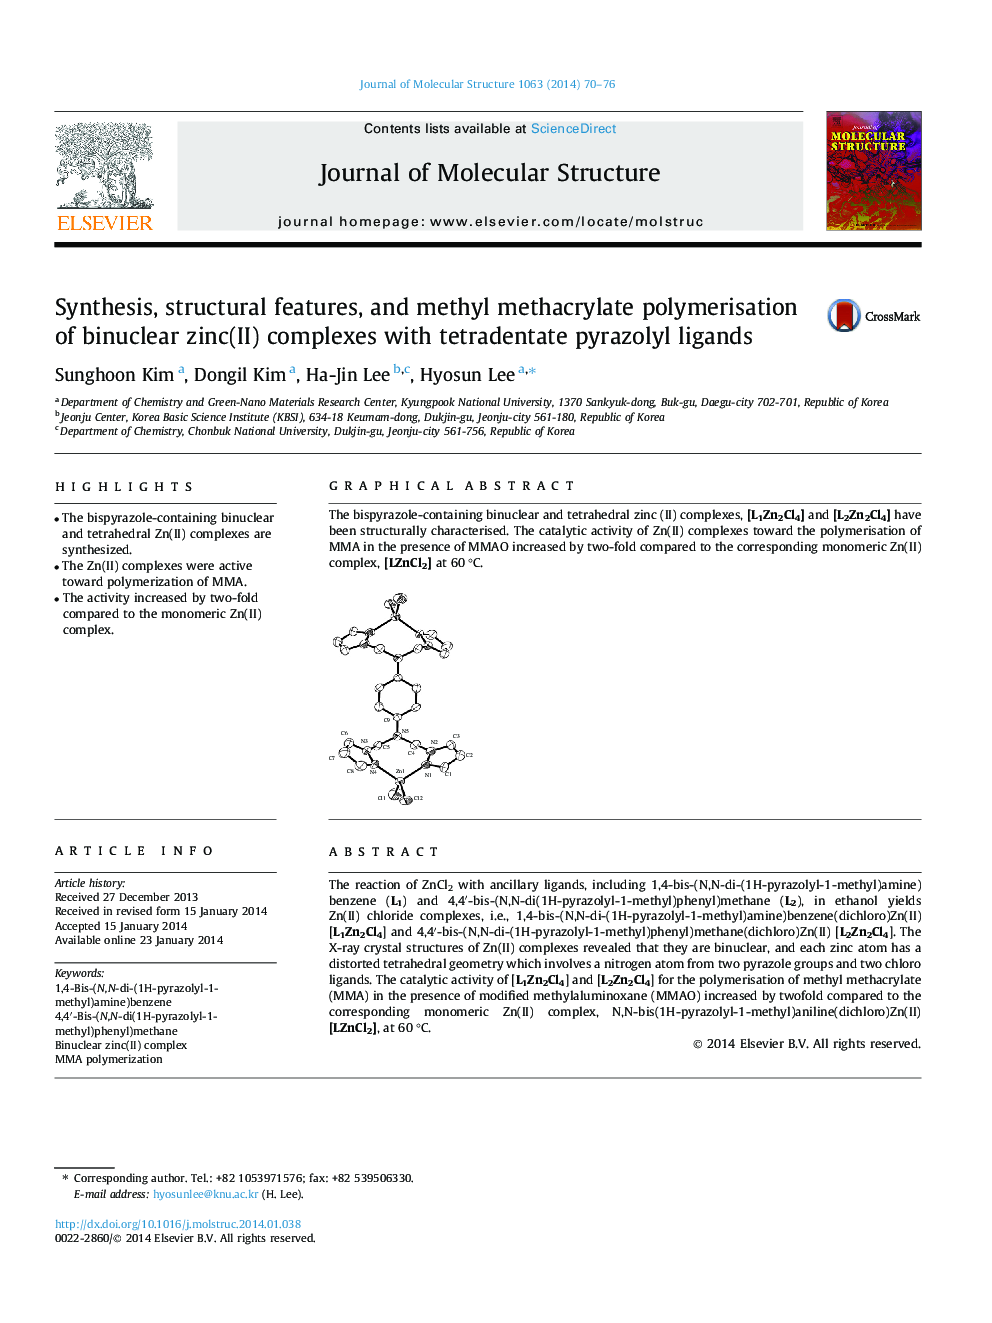 Synthesis, structural features, and methyl methacrylate polymerisation of binuclear zinc(II) complexes with tetradentate pyrazolyl ligands